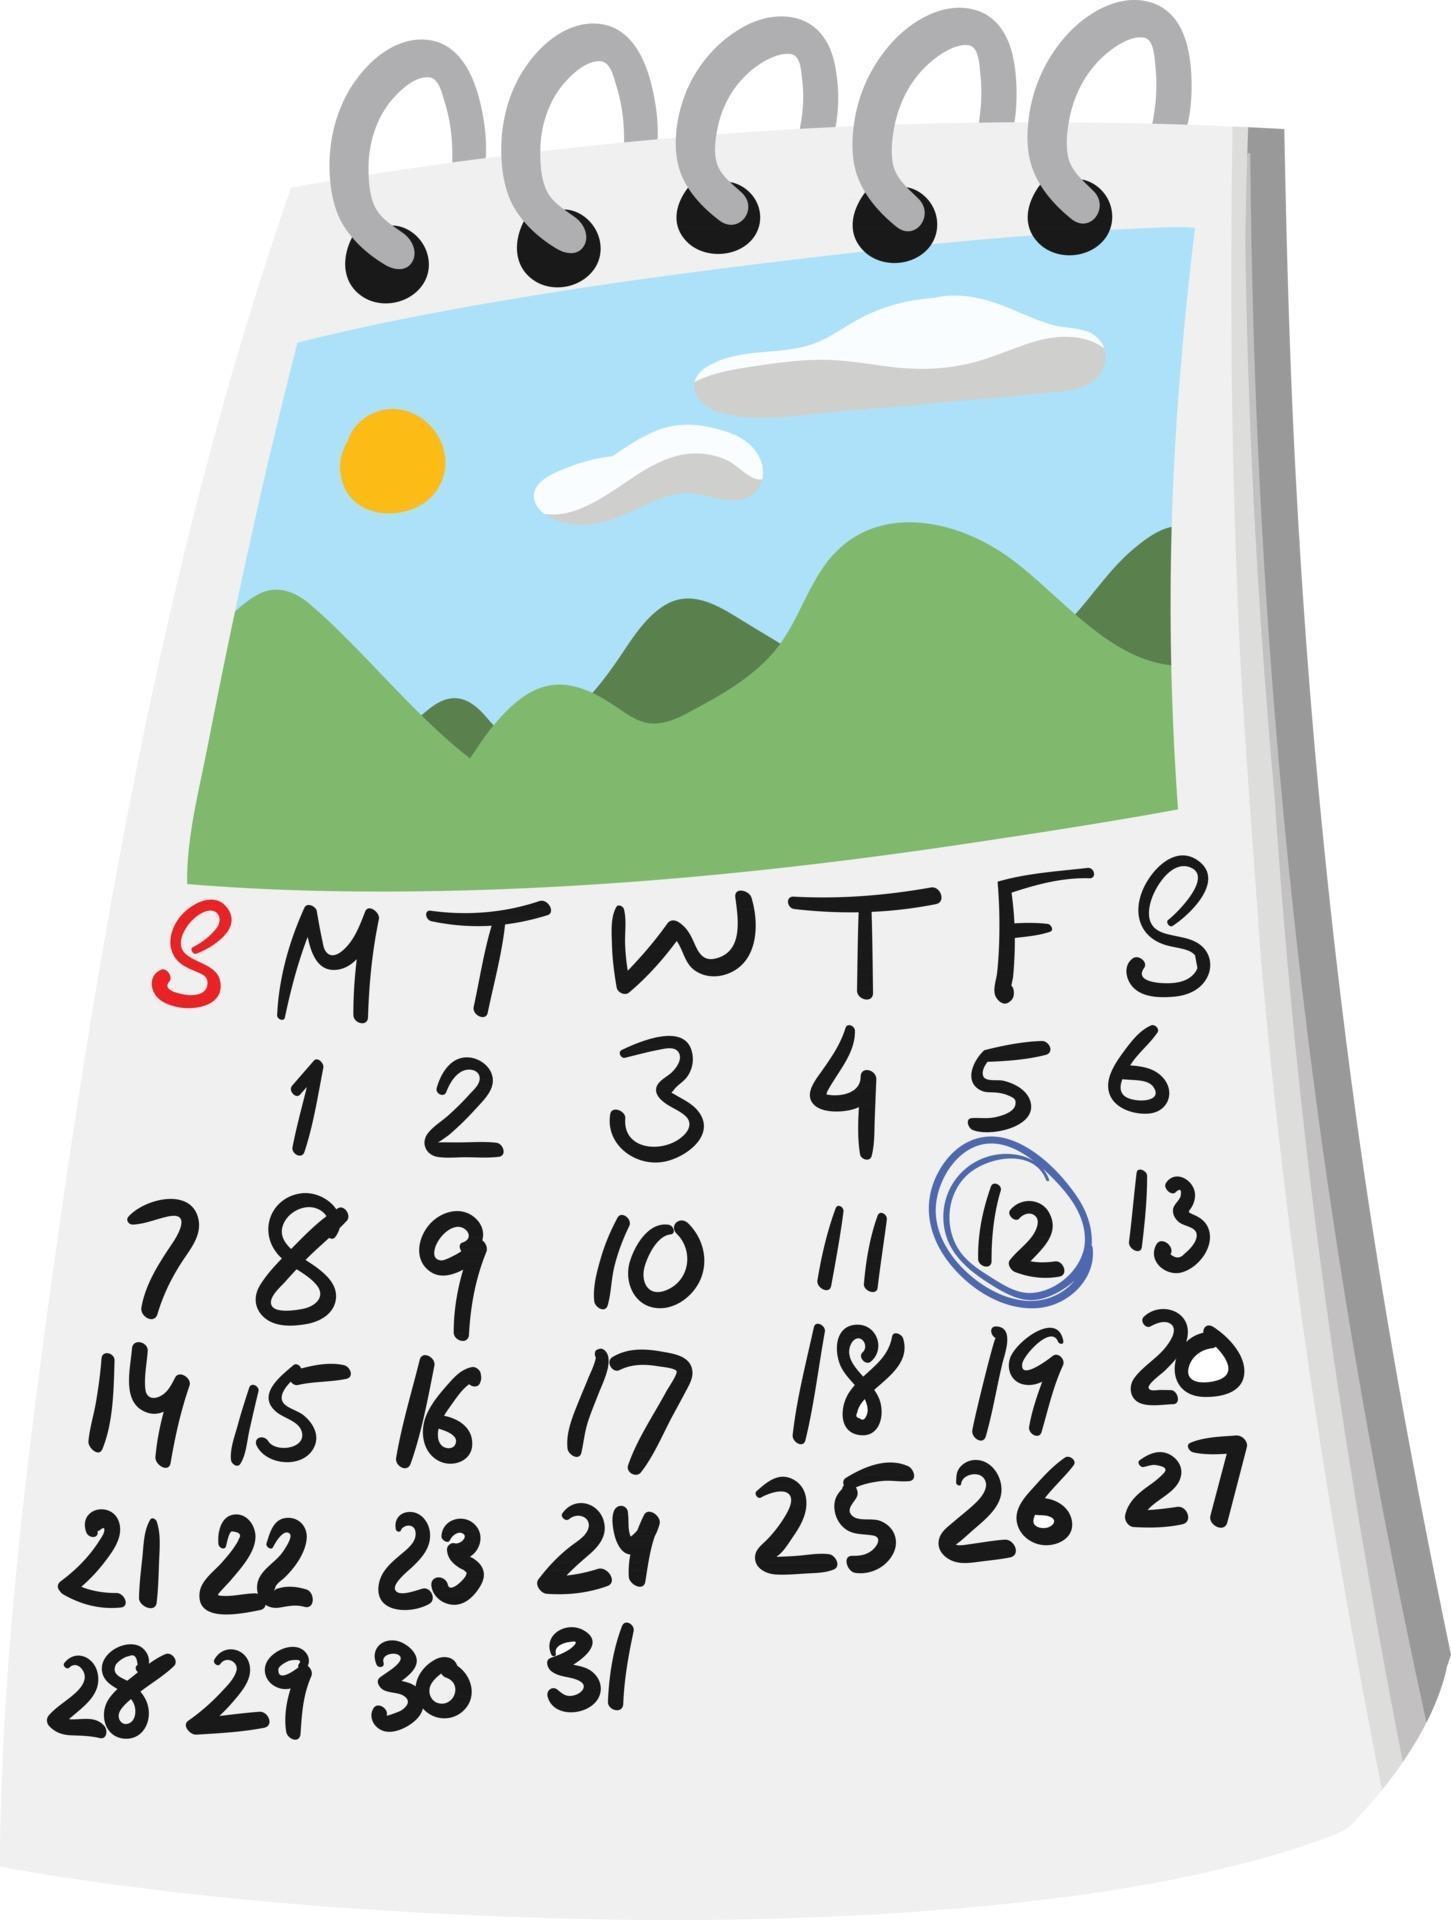 Cartoon style travel Calendar with date circled and travel picture on